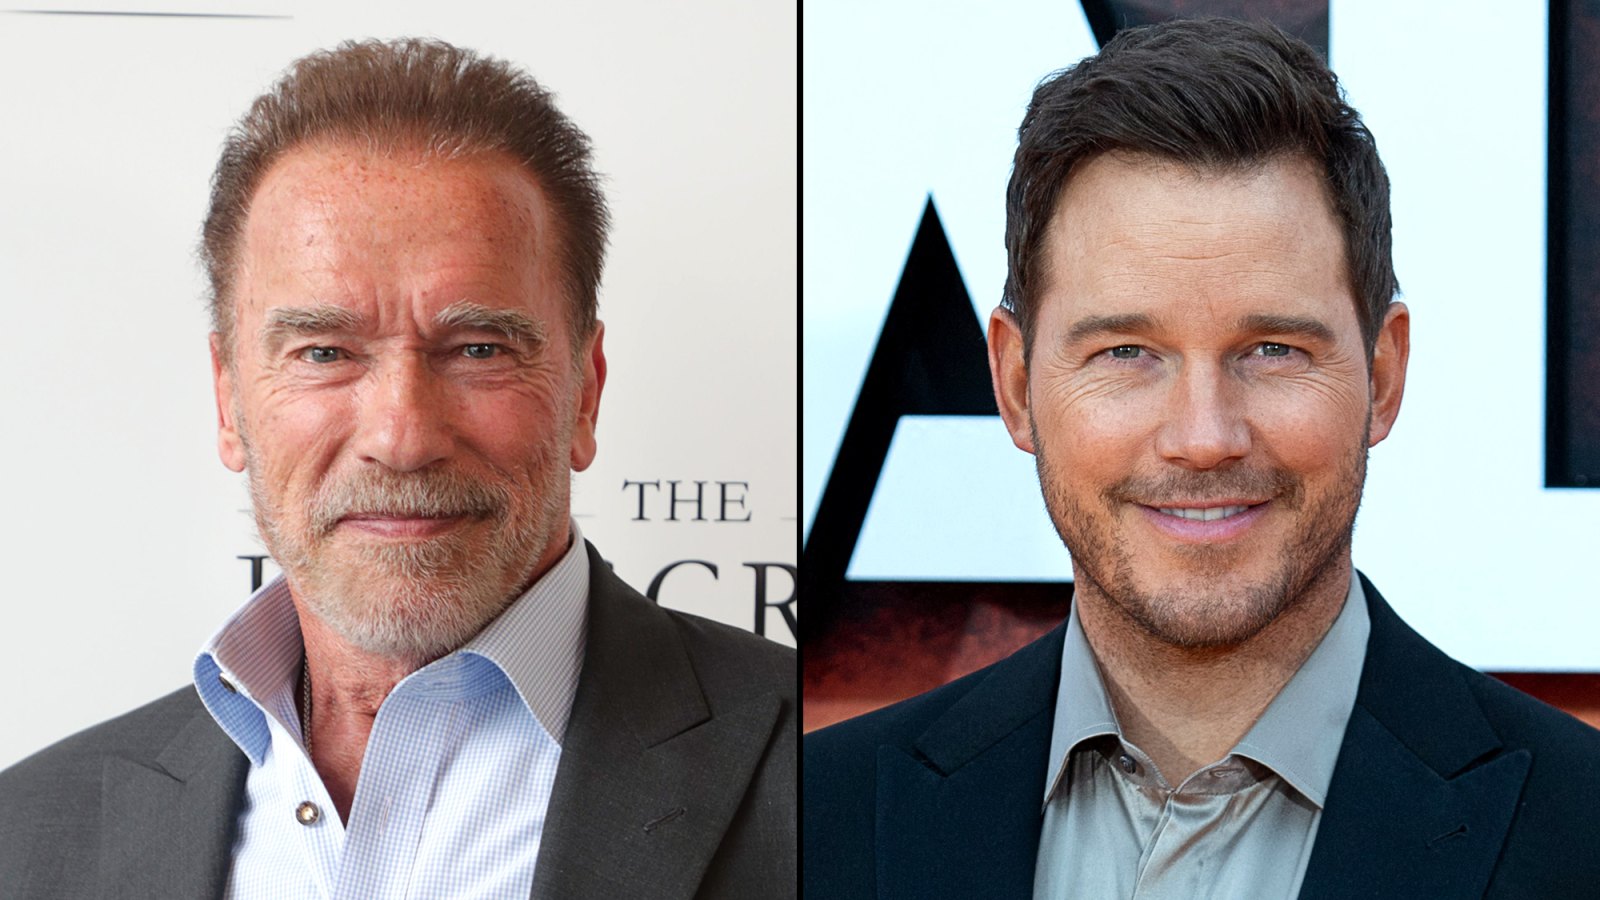 Arnold Schwarzenegger is Very Proud’ of Son-In-Law Chris Pratt After Seeing ‘Guardians of the Galaxy’